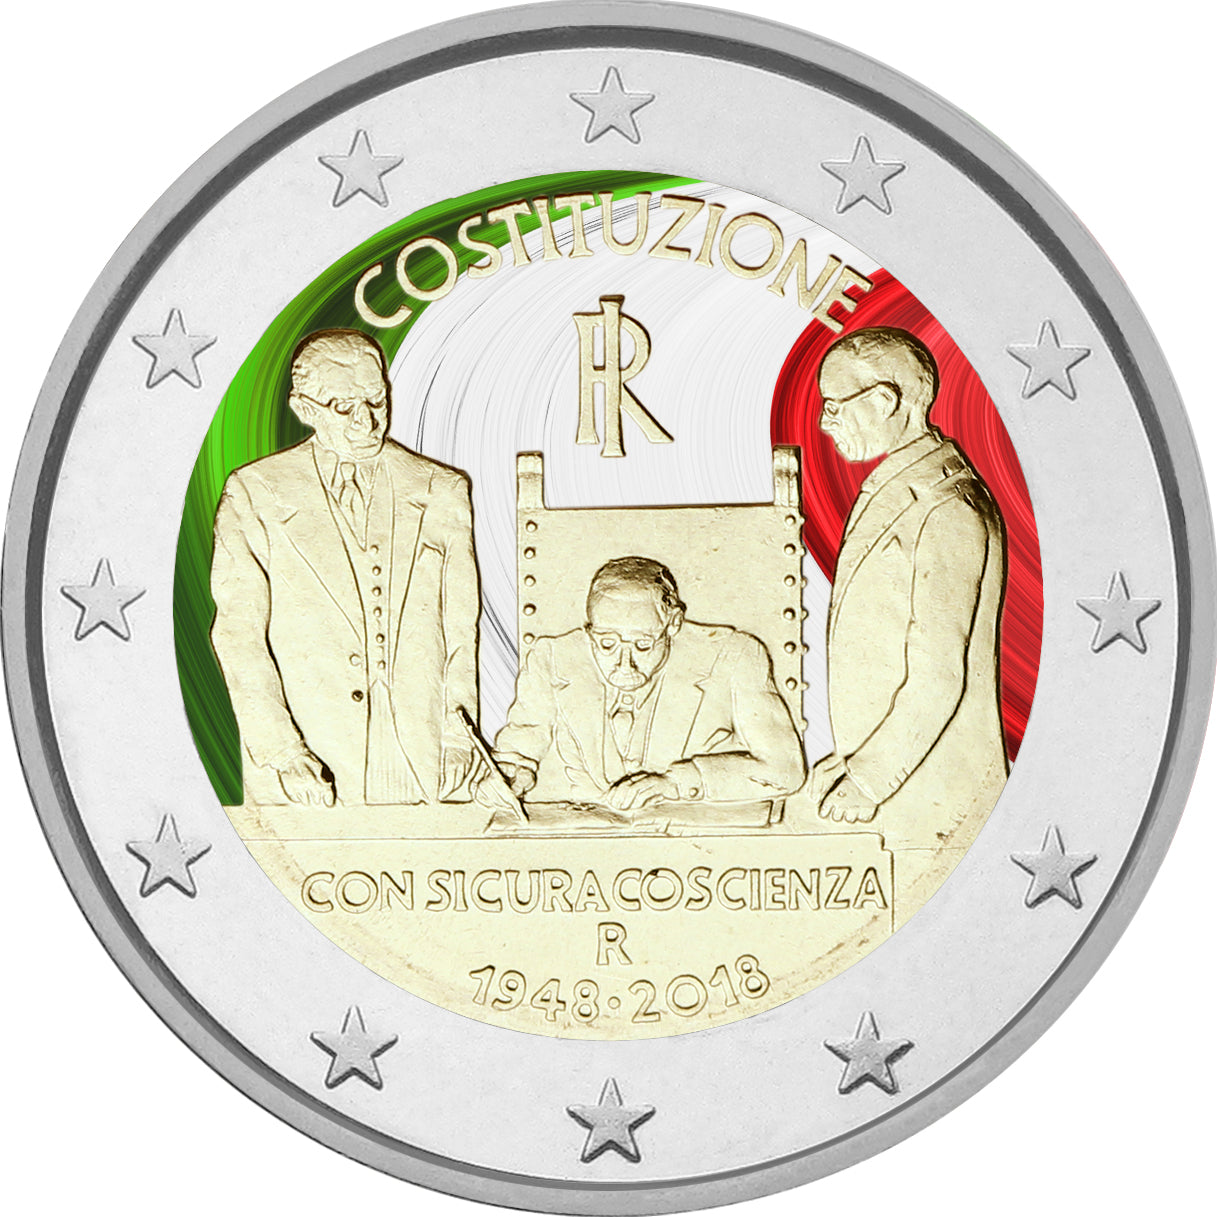 Italy - 2 Euro Colored 2018, 70 years of Constitution